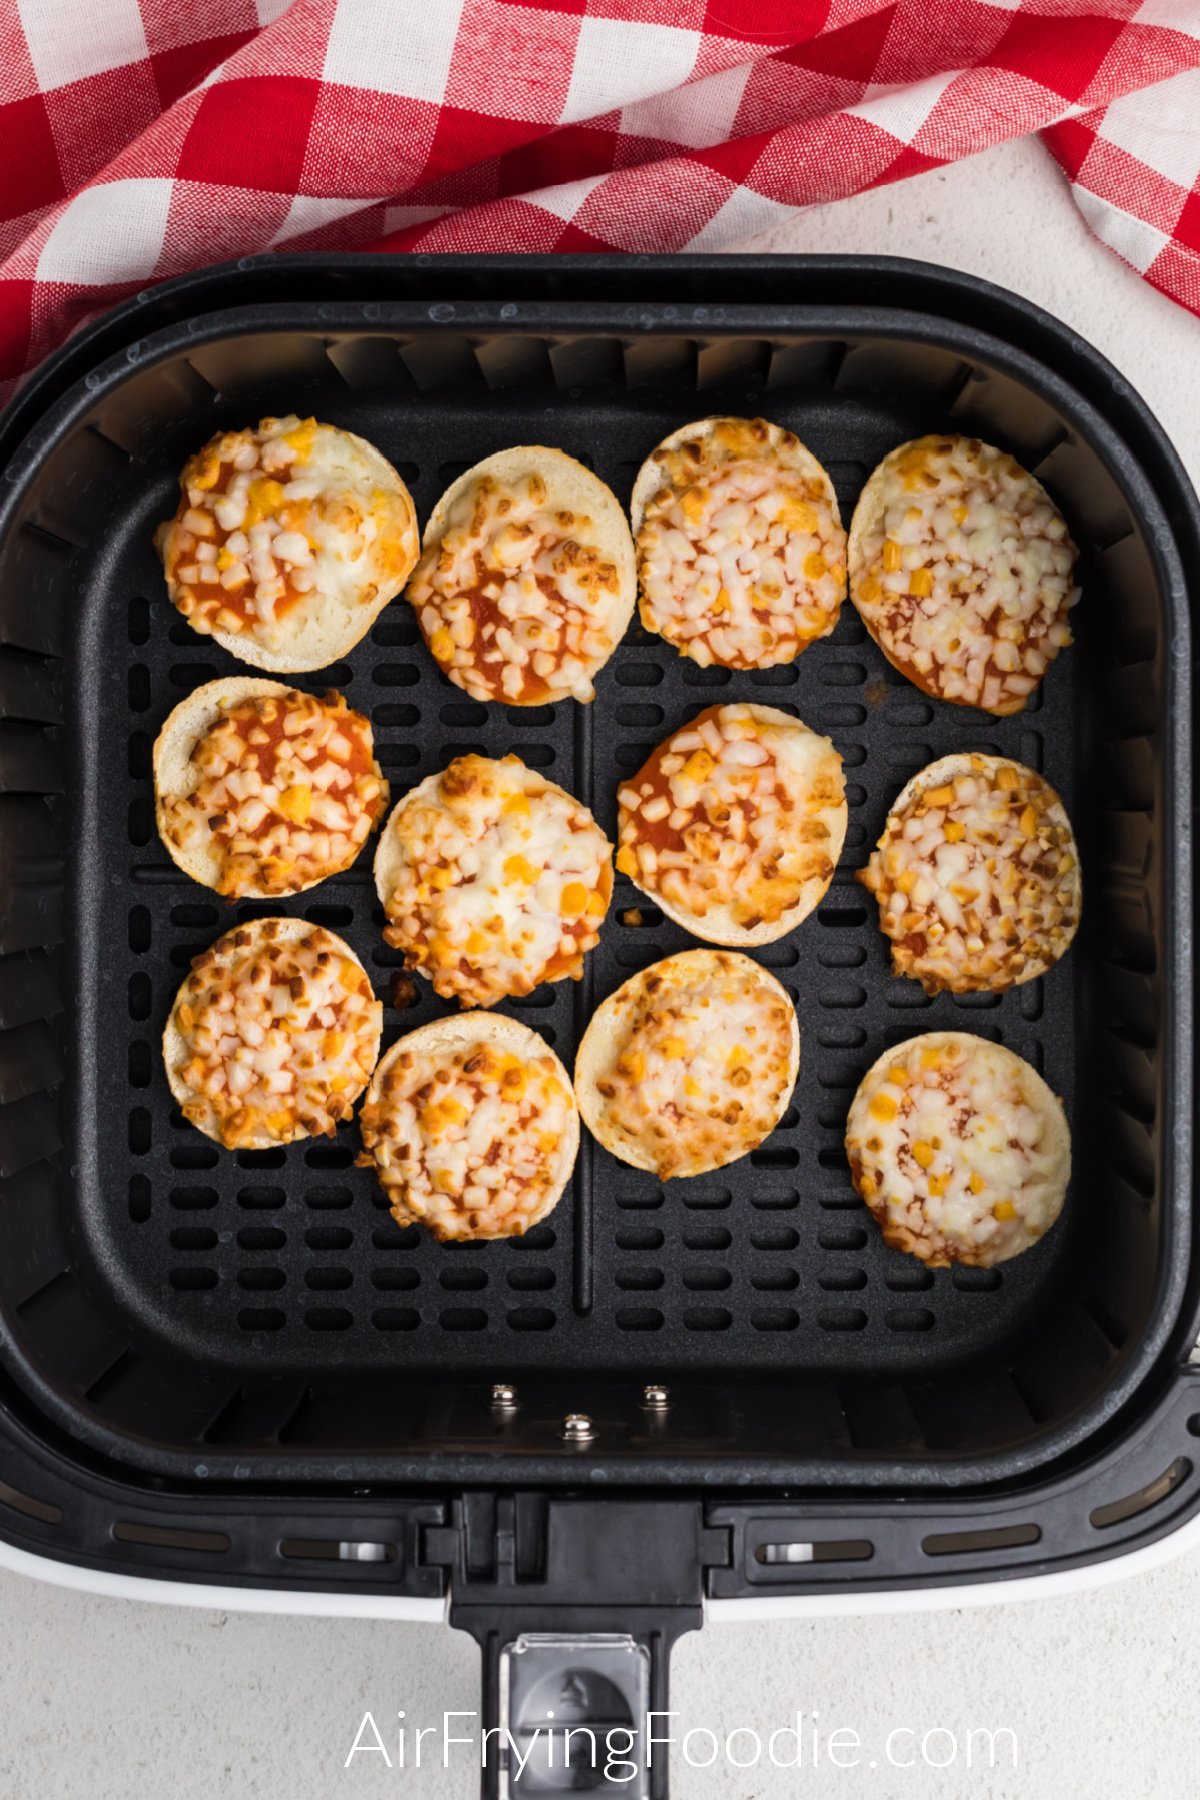 Air Fried Bagel bites in the basket of the air fryer.